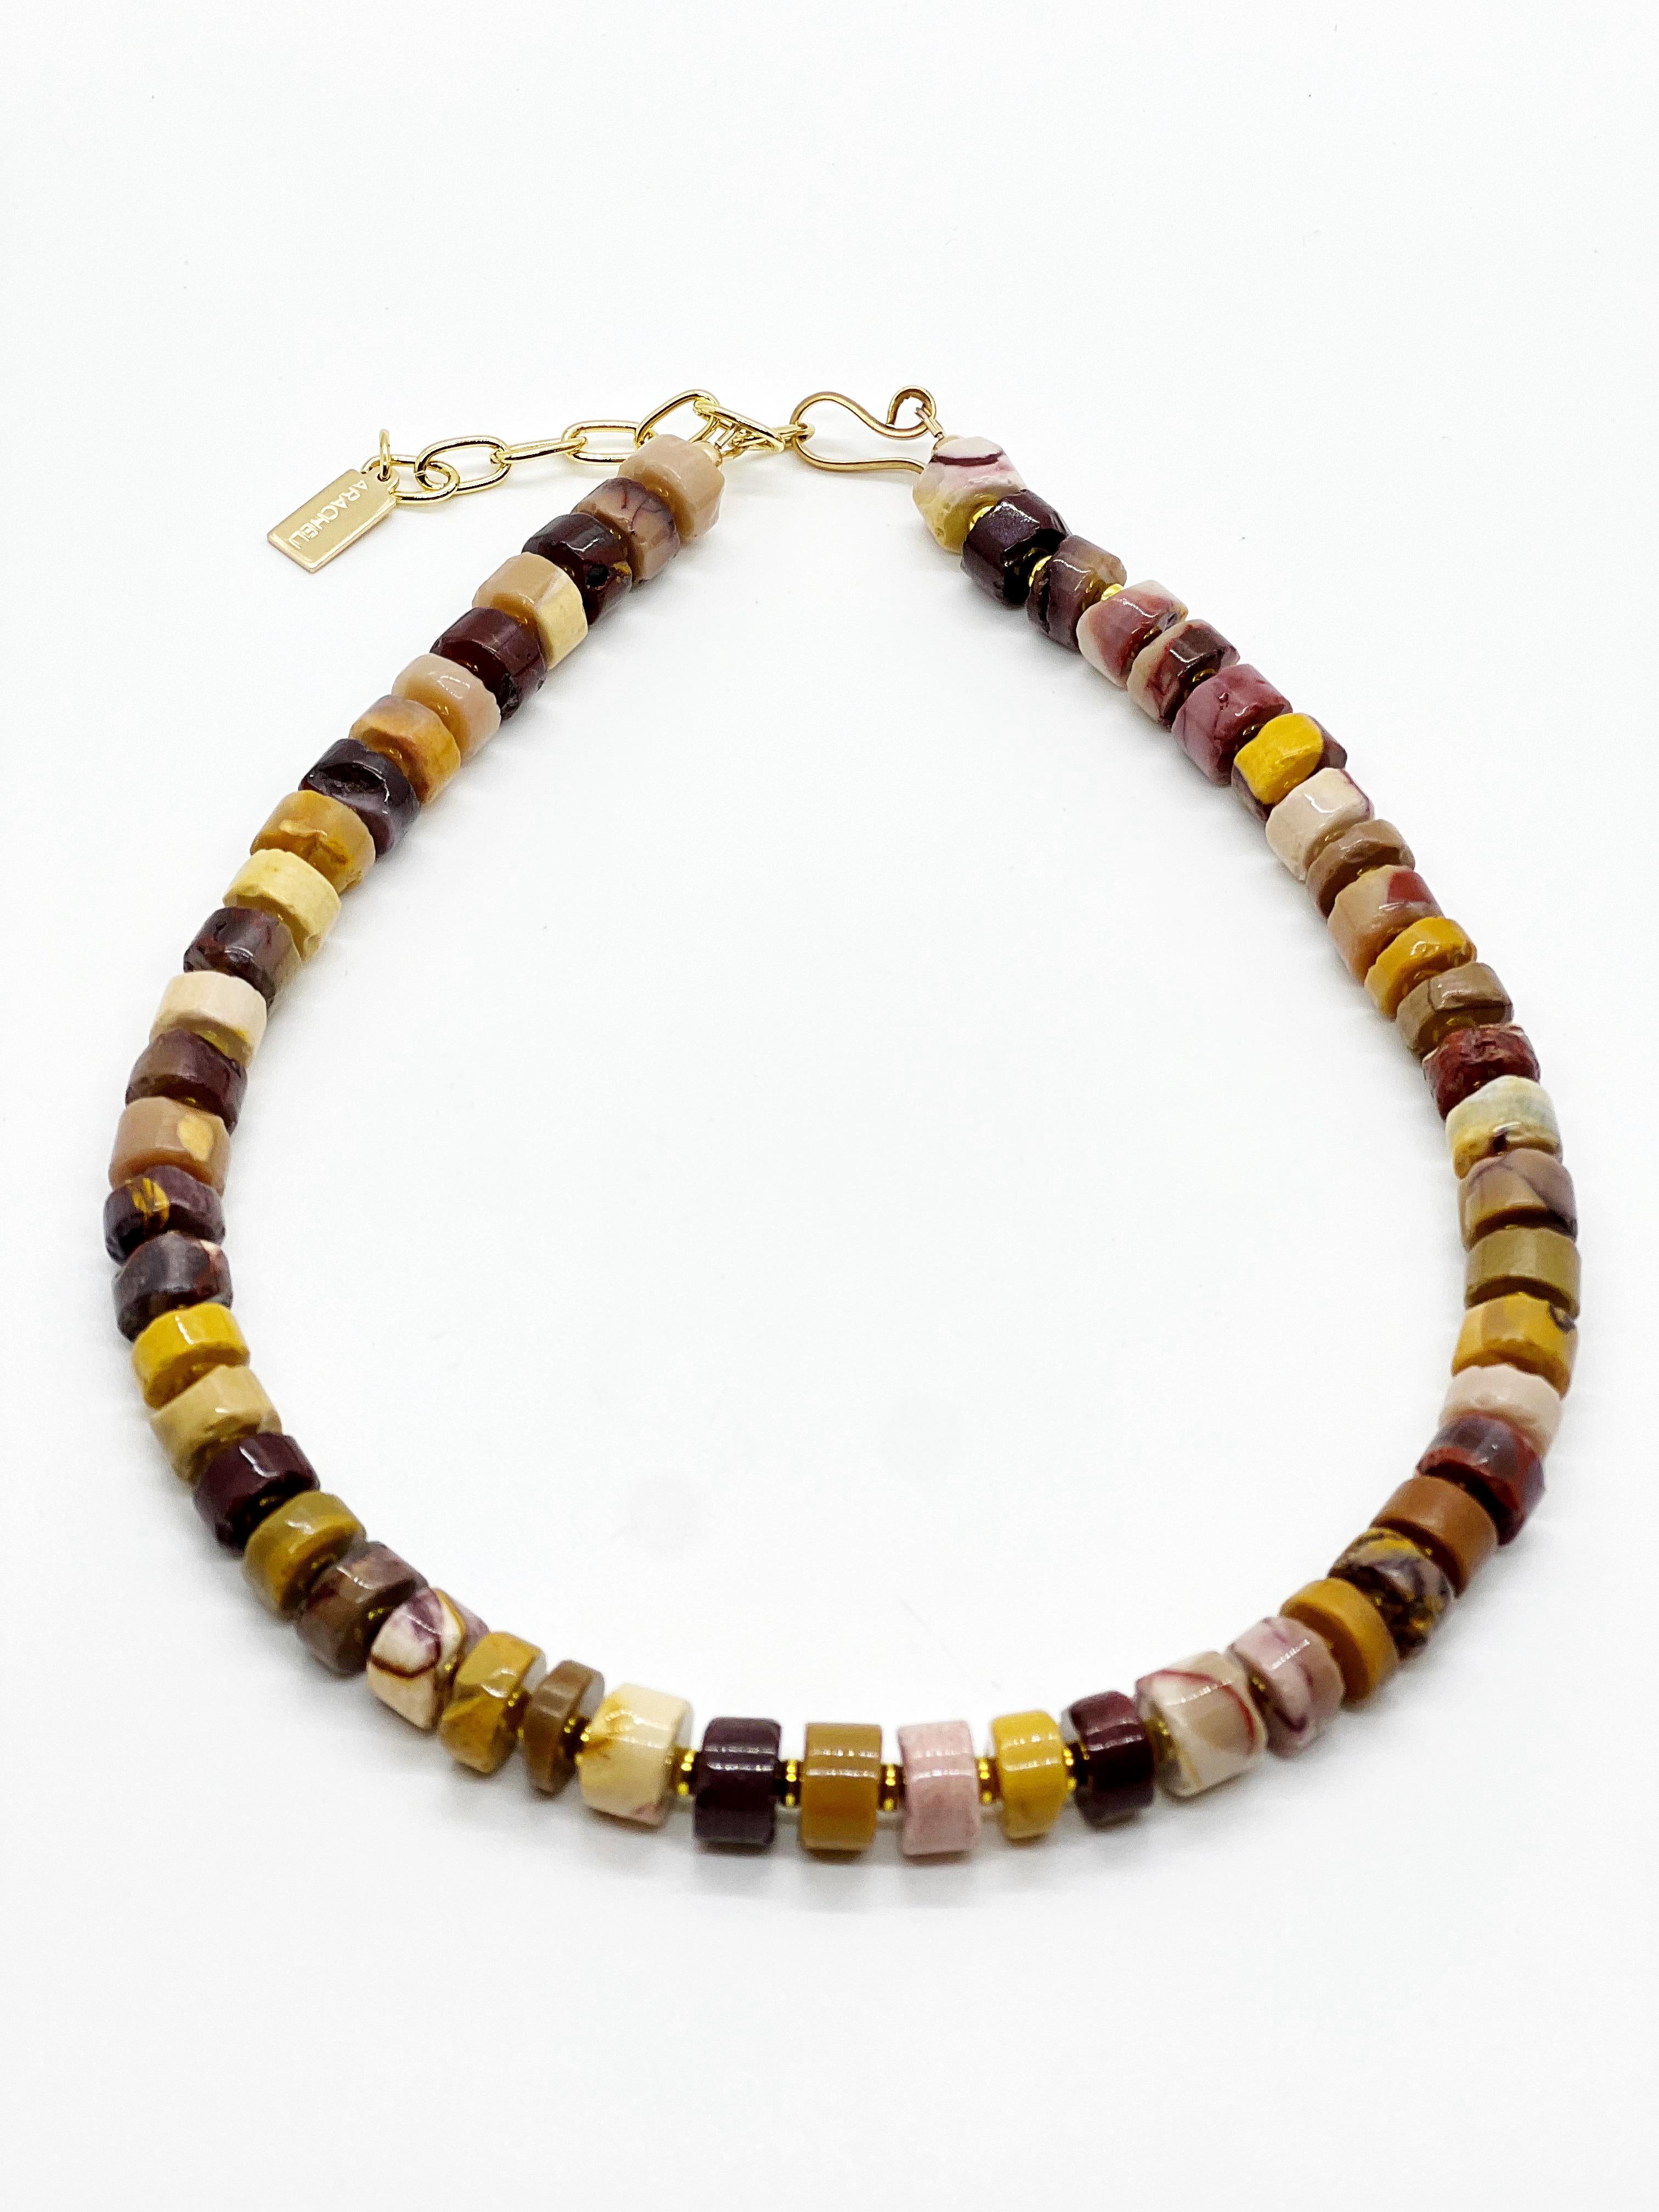 Mookaite Jasper semi-precious necklace. Mookaite jasper is a nurturing stone that supports and sustains during times of stress. It brings peace and a feeling of wholeness

Because of the nature of this jewelry, it is unique.

Product Detail: